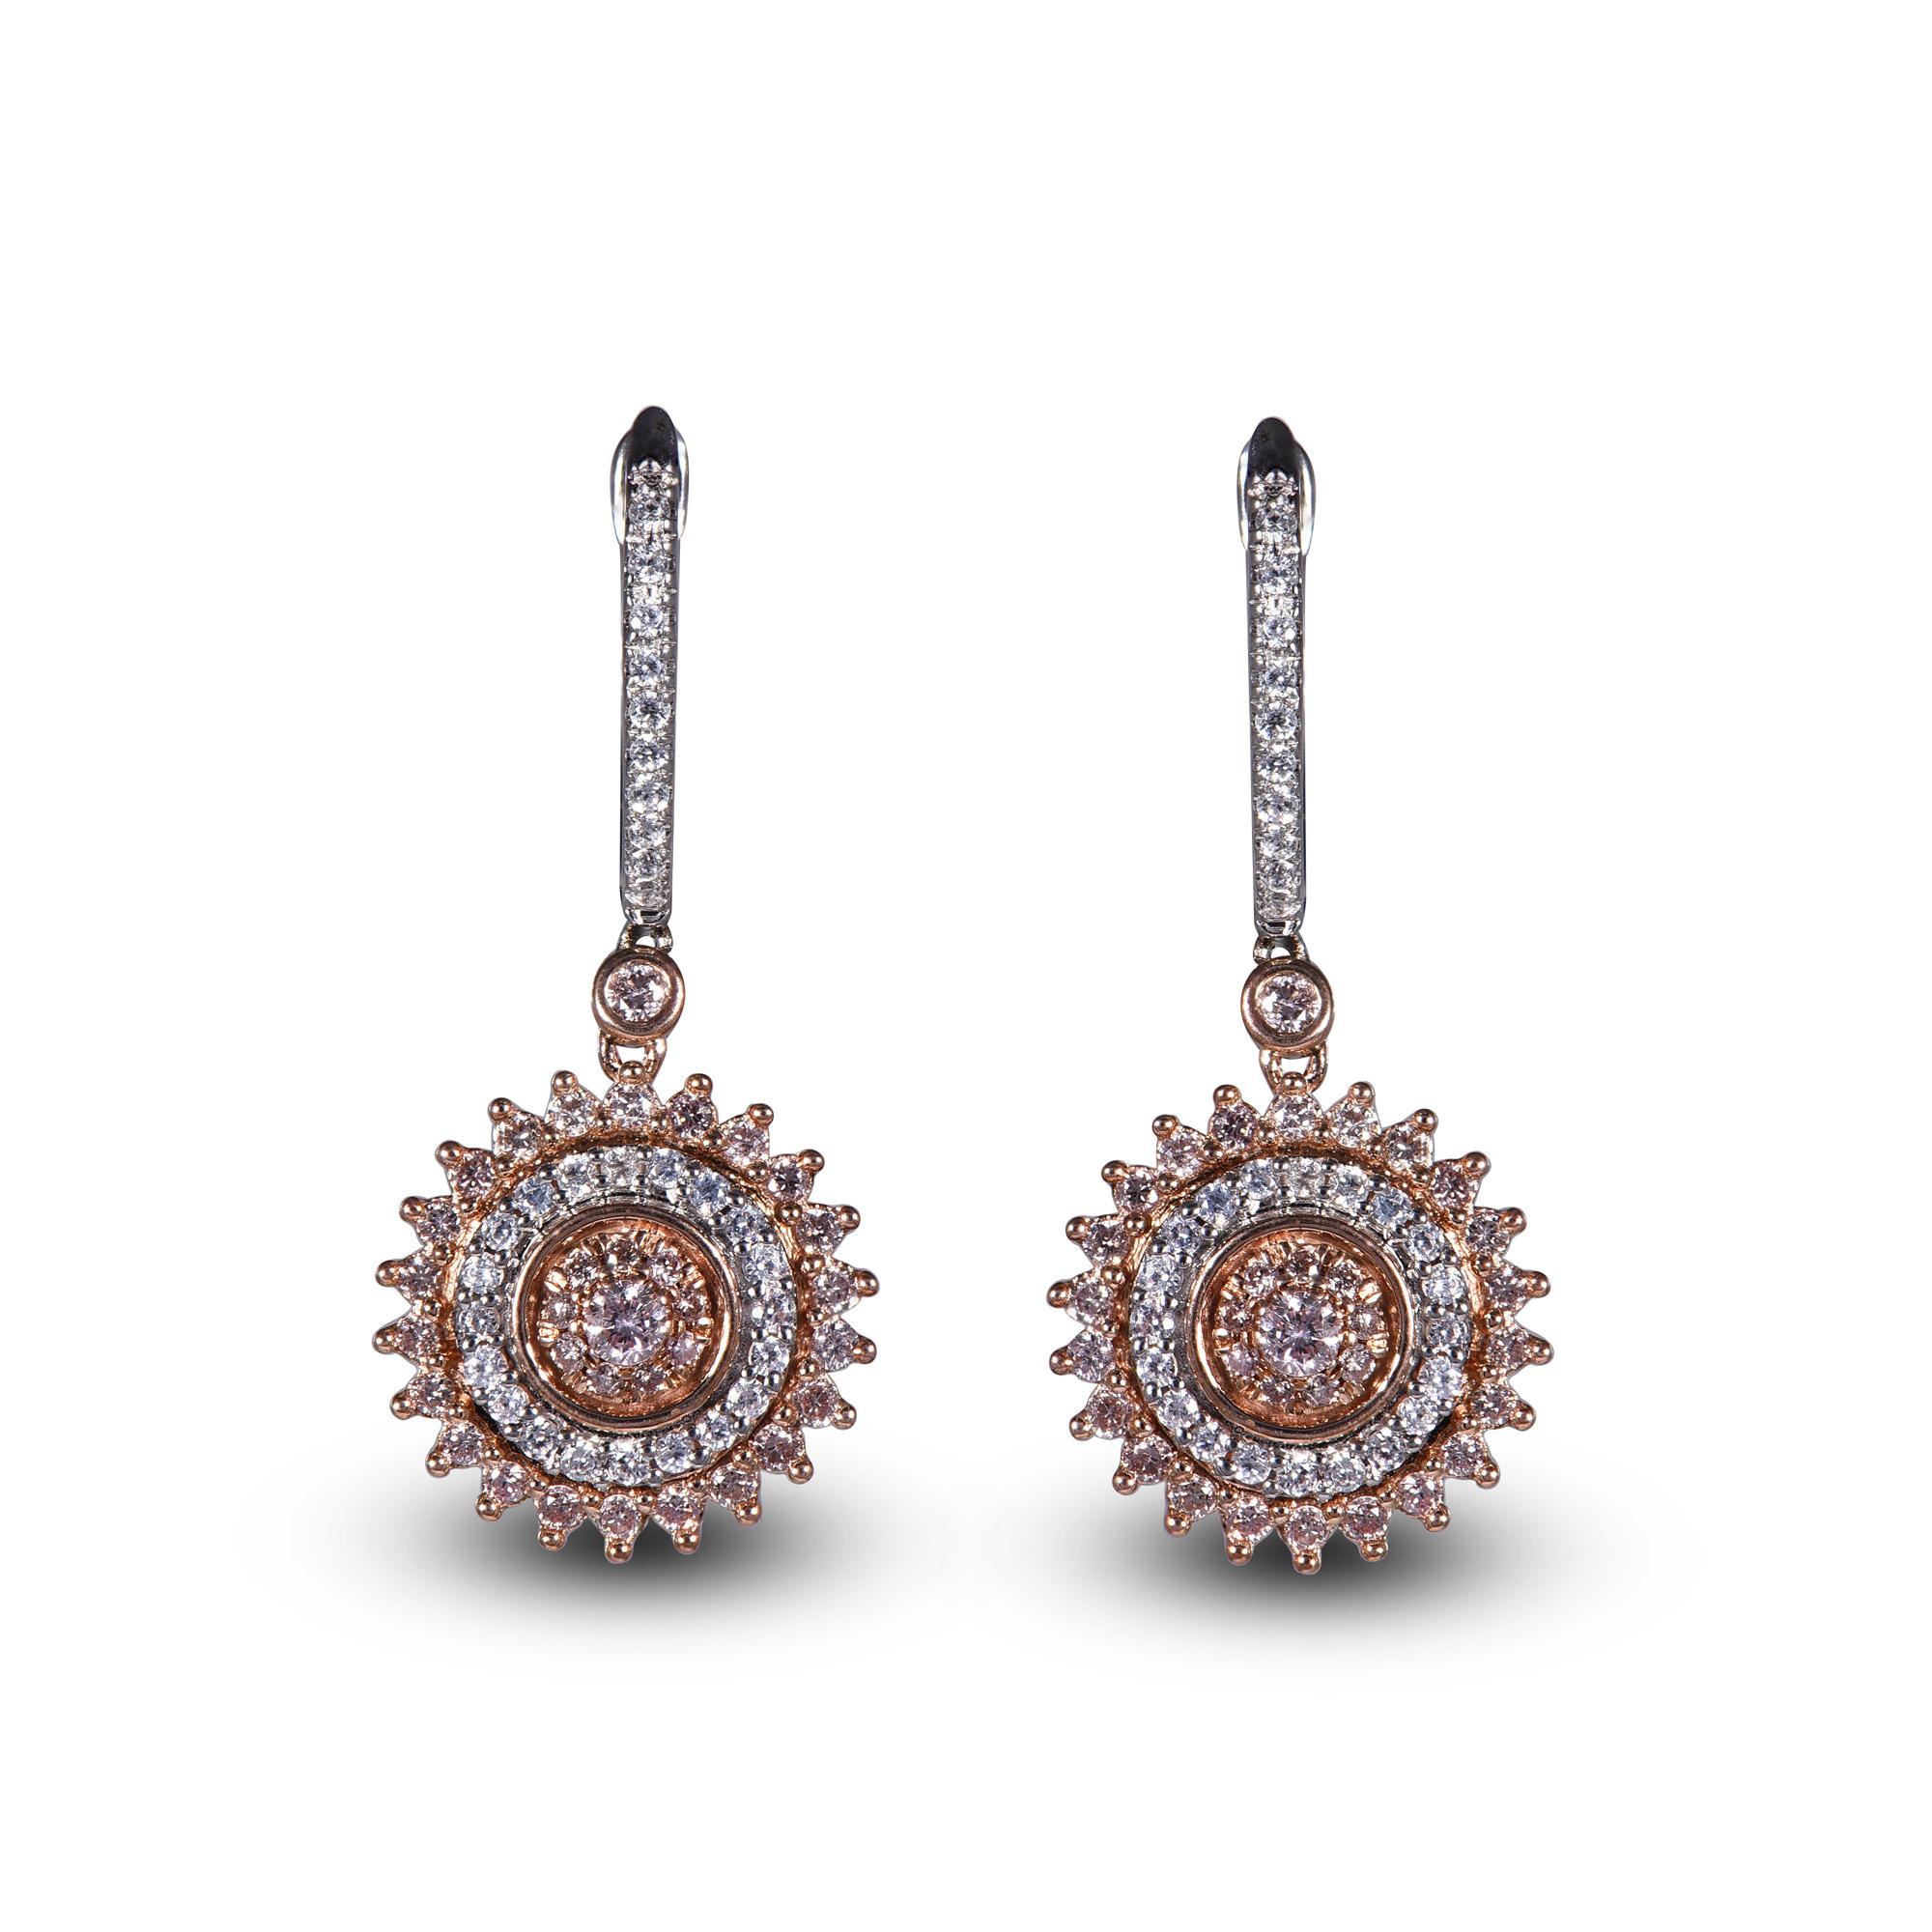 Adorn your formal wear with extra glitz when you put on these hoop huggie earrings. Expertly crafted in 18K White and Rose Gold,  earring is cleverly filled with 60 round White and 66 pink diamond set in micro-prong and prong setting and shimmers in